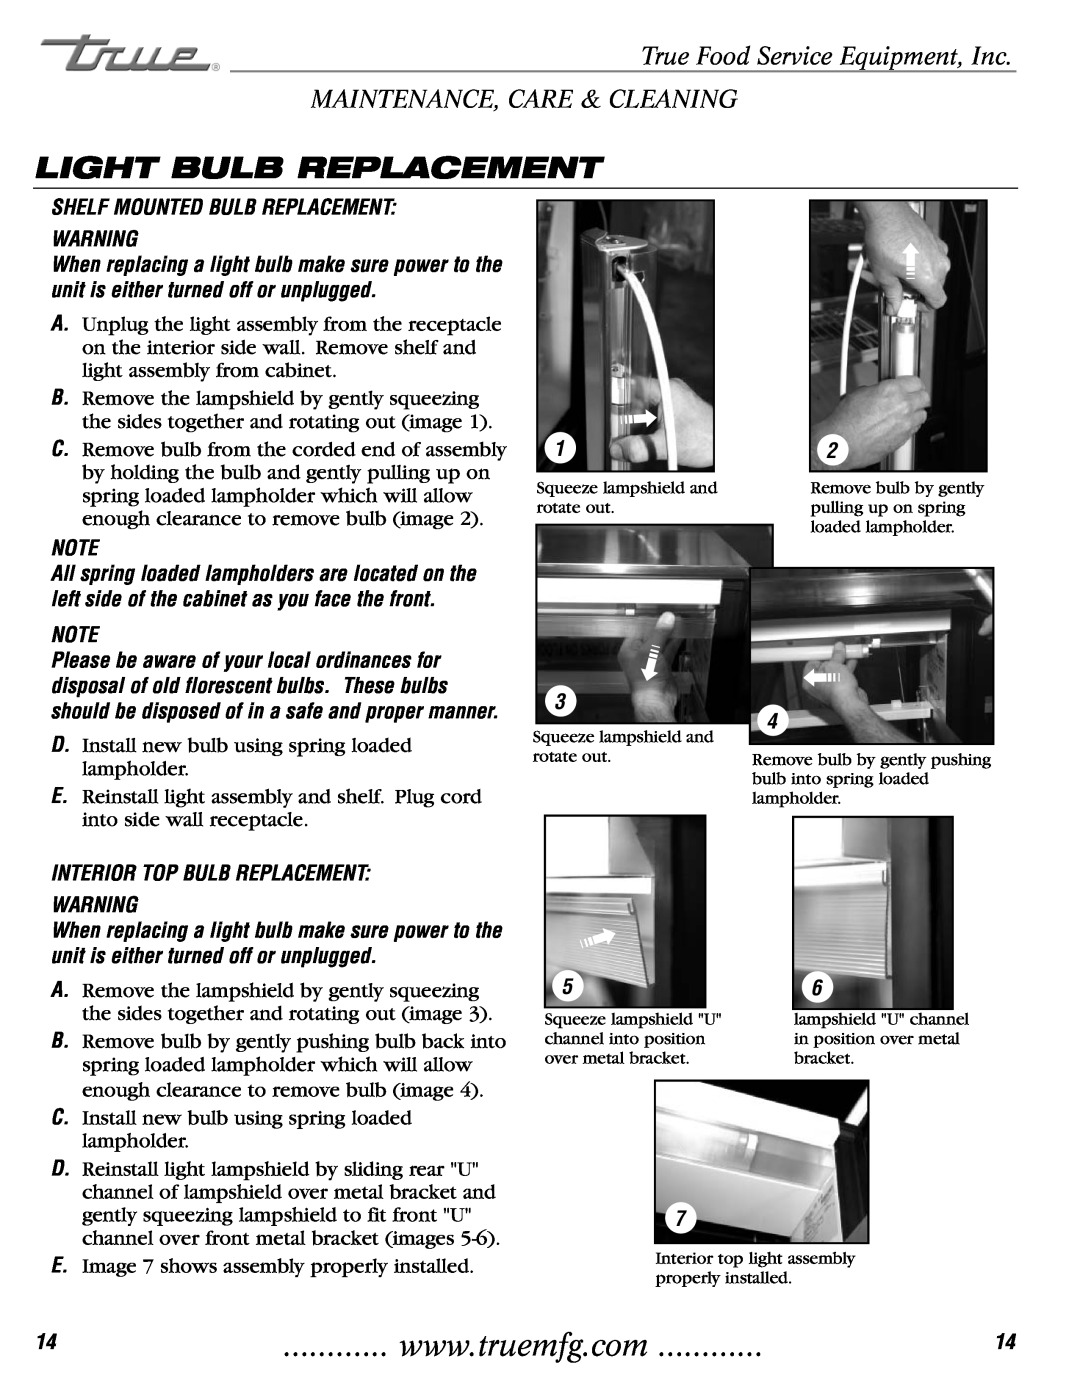 True Manufacturing Company TCGR-50-CD installation manual Light Bulb Replacement, Shelf Mounted Bulb Replacement 